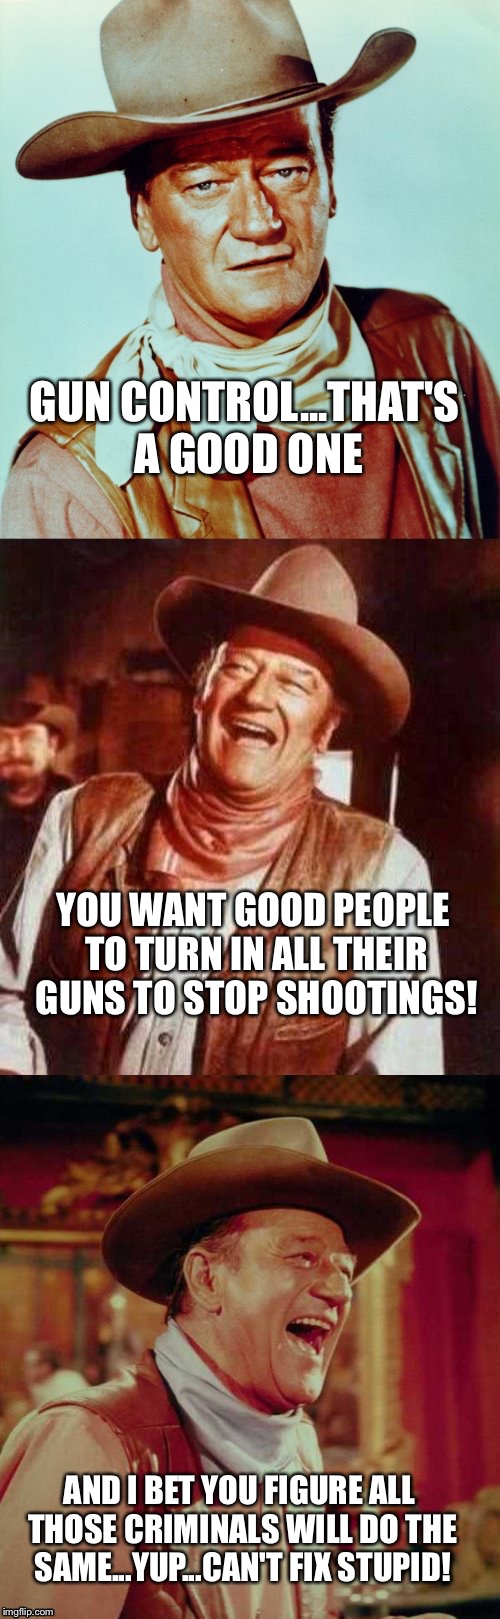 John Wayne Puns | GUN CONTROL...THAT'S A GOOD ONE; YOU WANT GOOD PEOPLE TO TURN IN ALL THEIR GUNS TO STOP SHOOTINGS! AND I BET YOU FIGURE ALL THOSE CRIMINALS WILL DO THE SAME...YUP...CAN'T FIX STUPID! | image tagged in john wayne puns | made w/ Imgflip meme maker